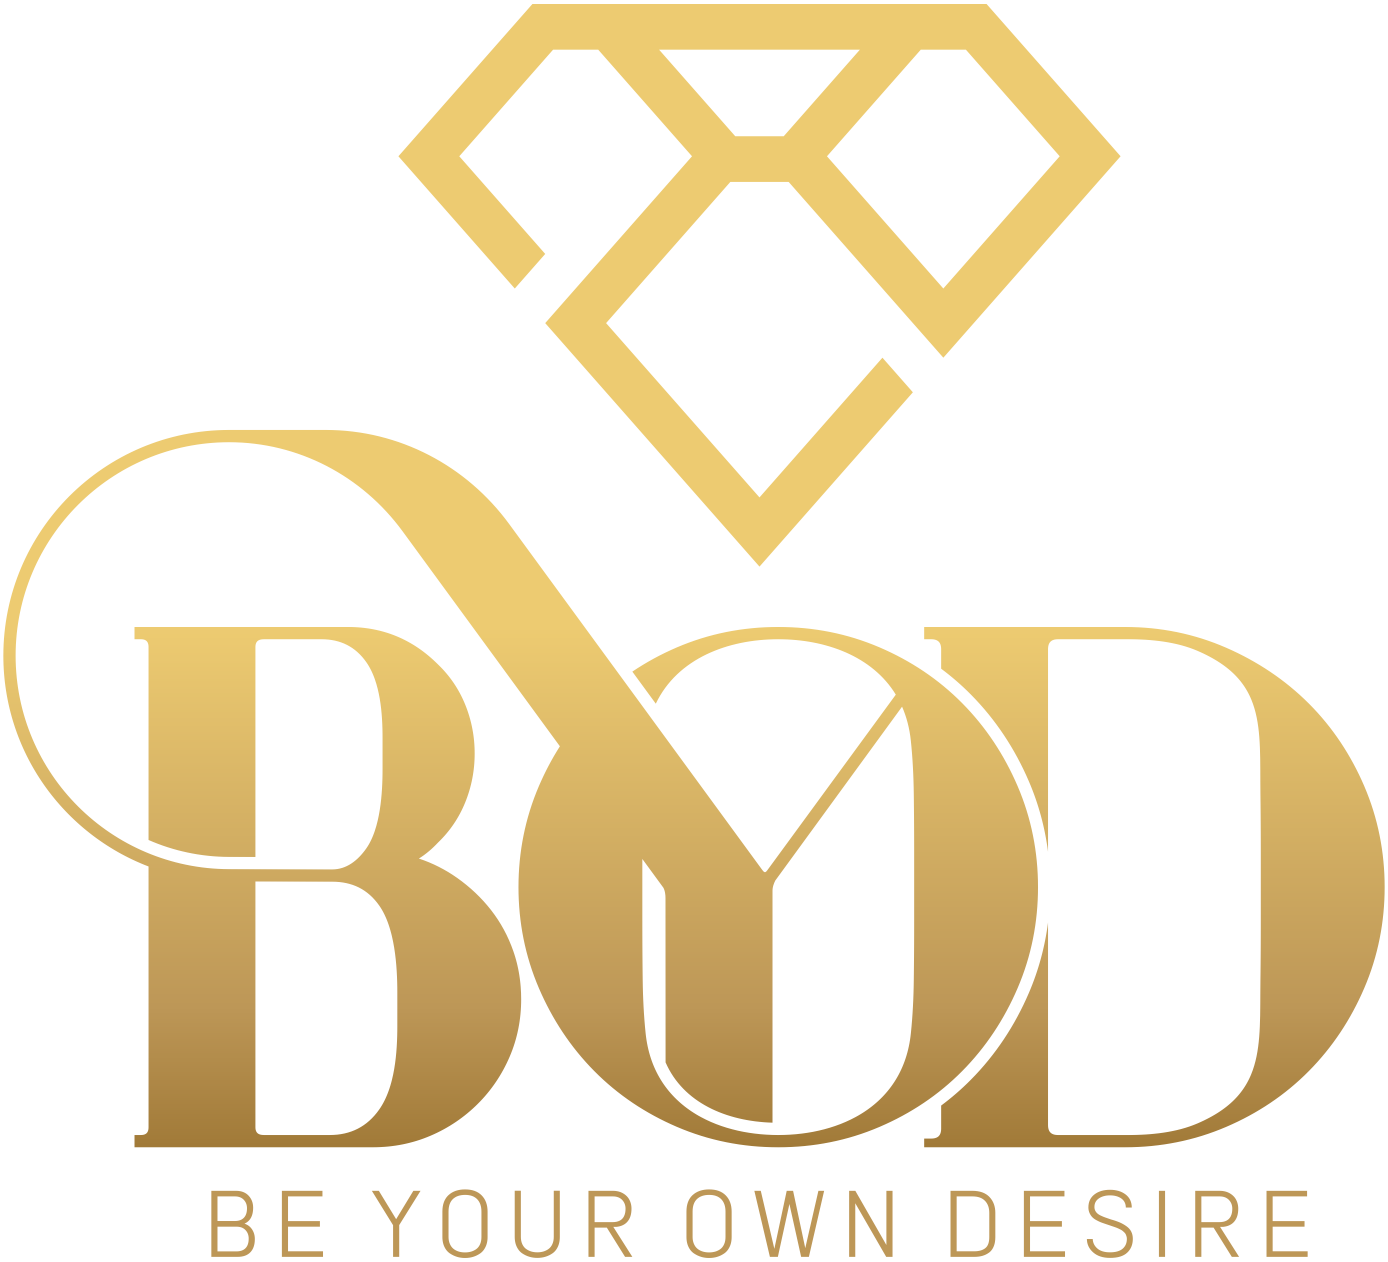 BYOD Be Your Own Desire Cosmetics LLC